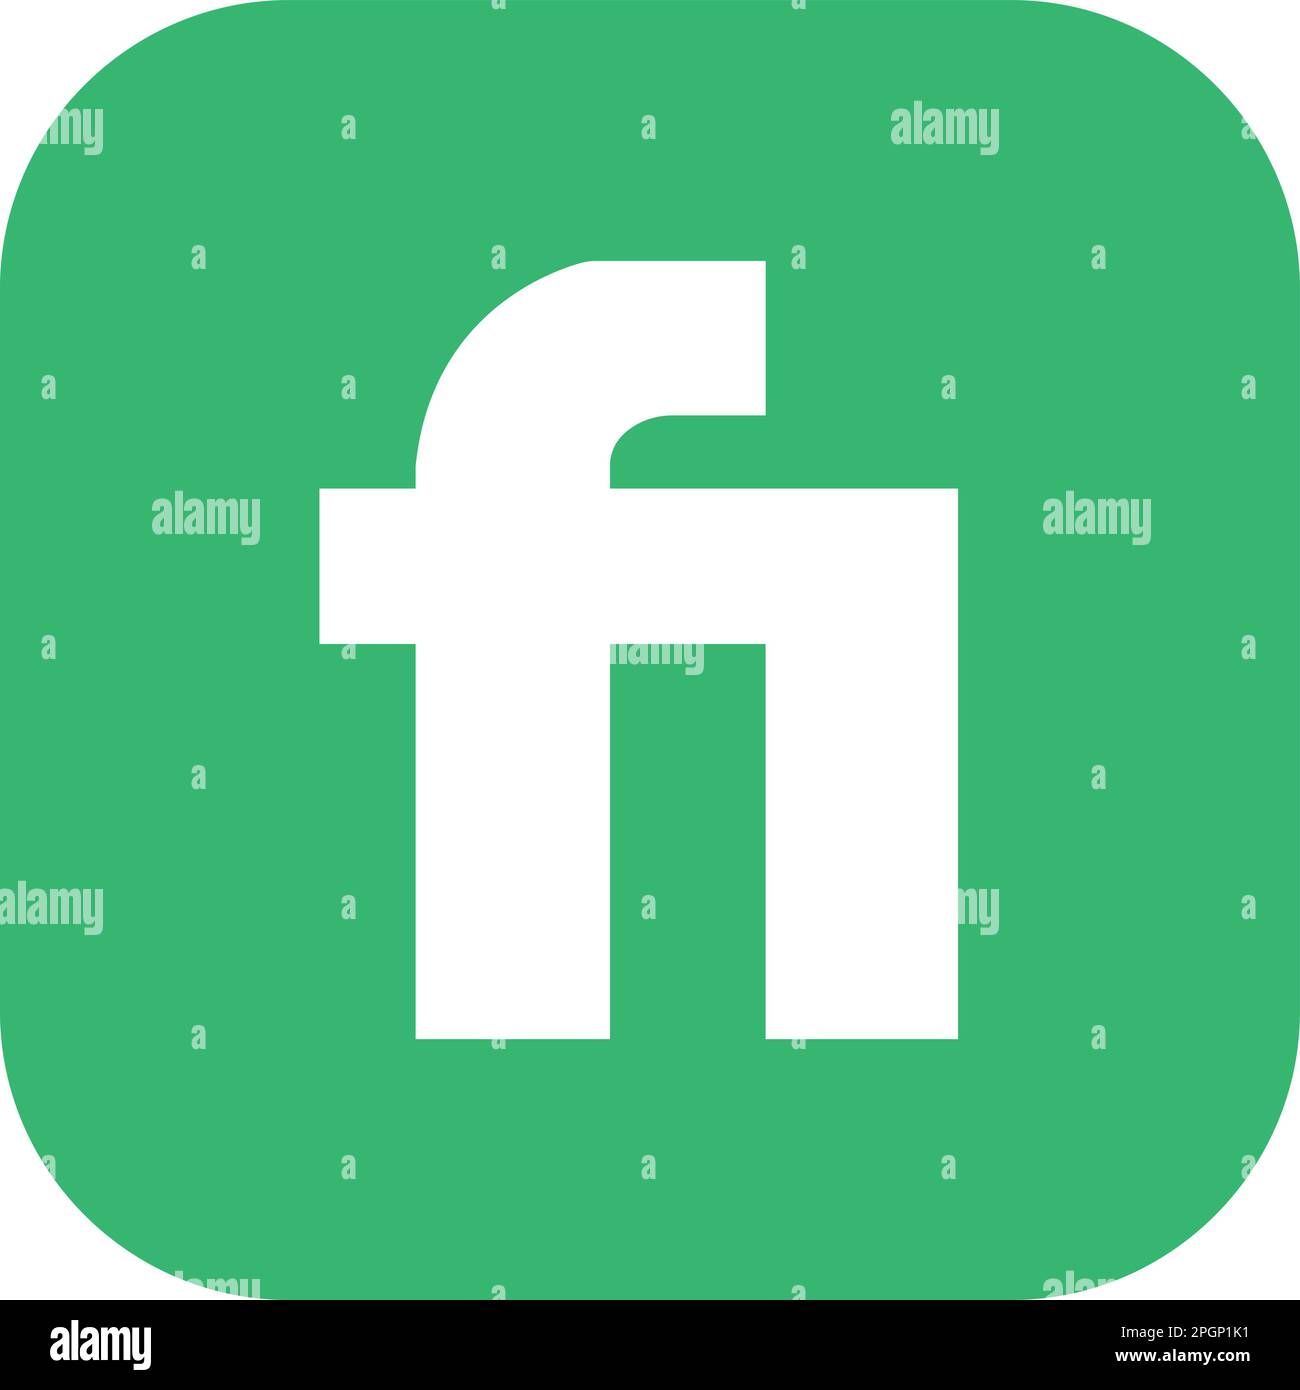 Fiverr app icon freelancing market is perfect for use in any mobile app-related project. Modern design with the iconic Fiver logo in a clean. Use it o Stock Vector